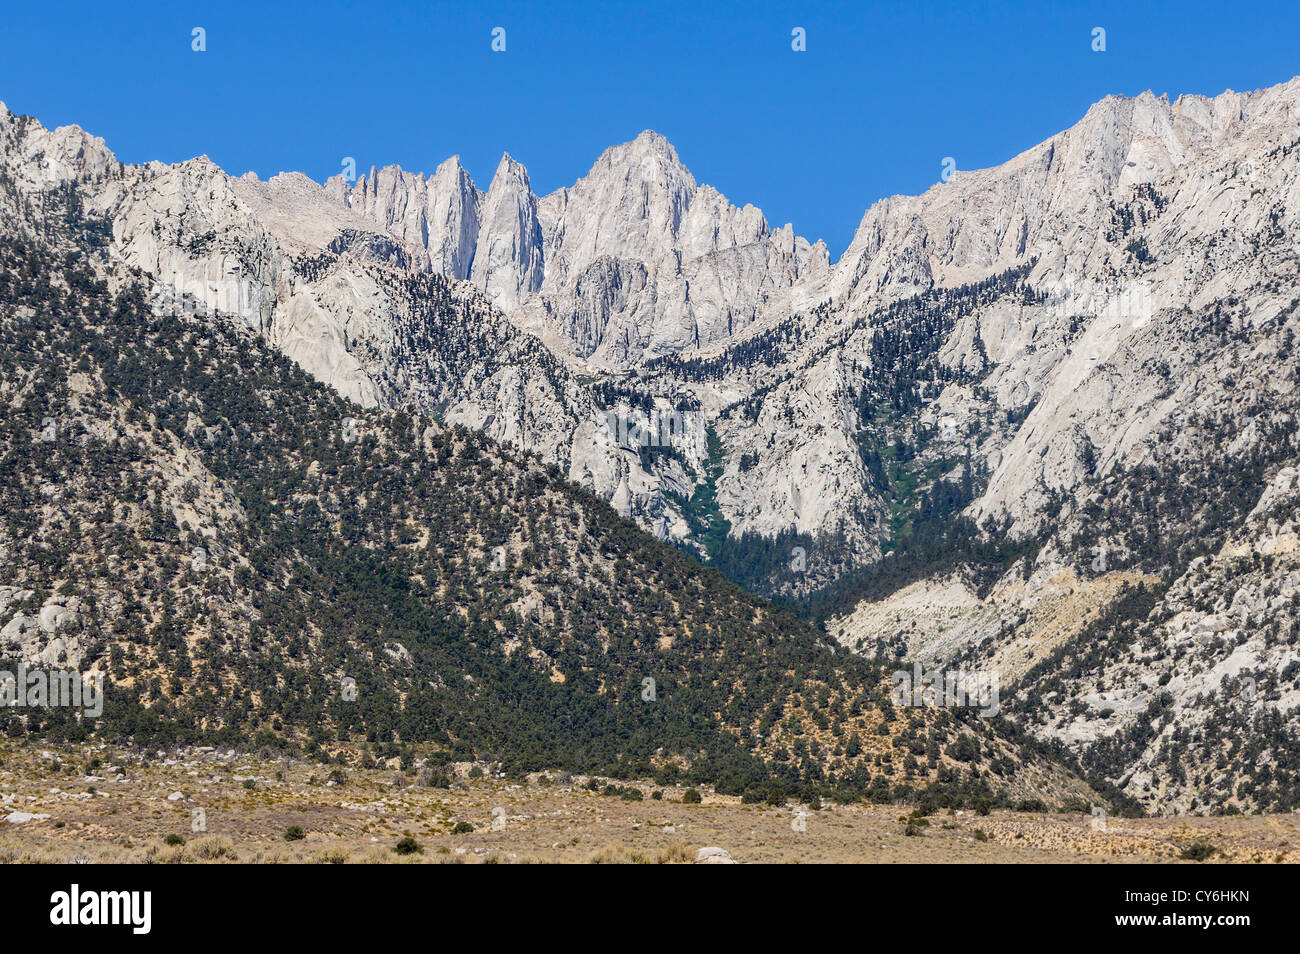 View to Mount Whitney from Alabama Hills, Lone Pine, in Owens Valley of Western Sierras off Route 395. Stock Photo